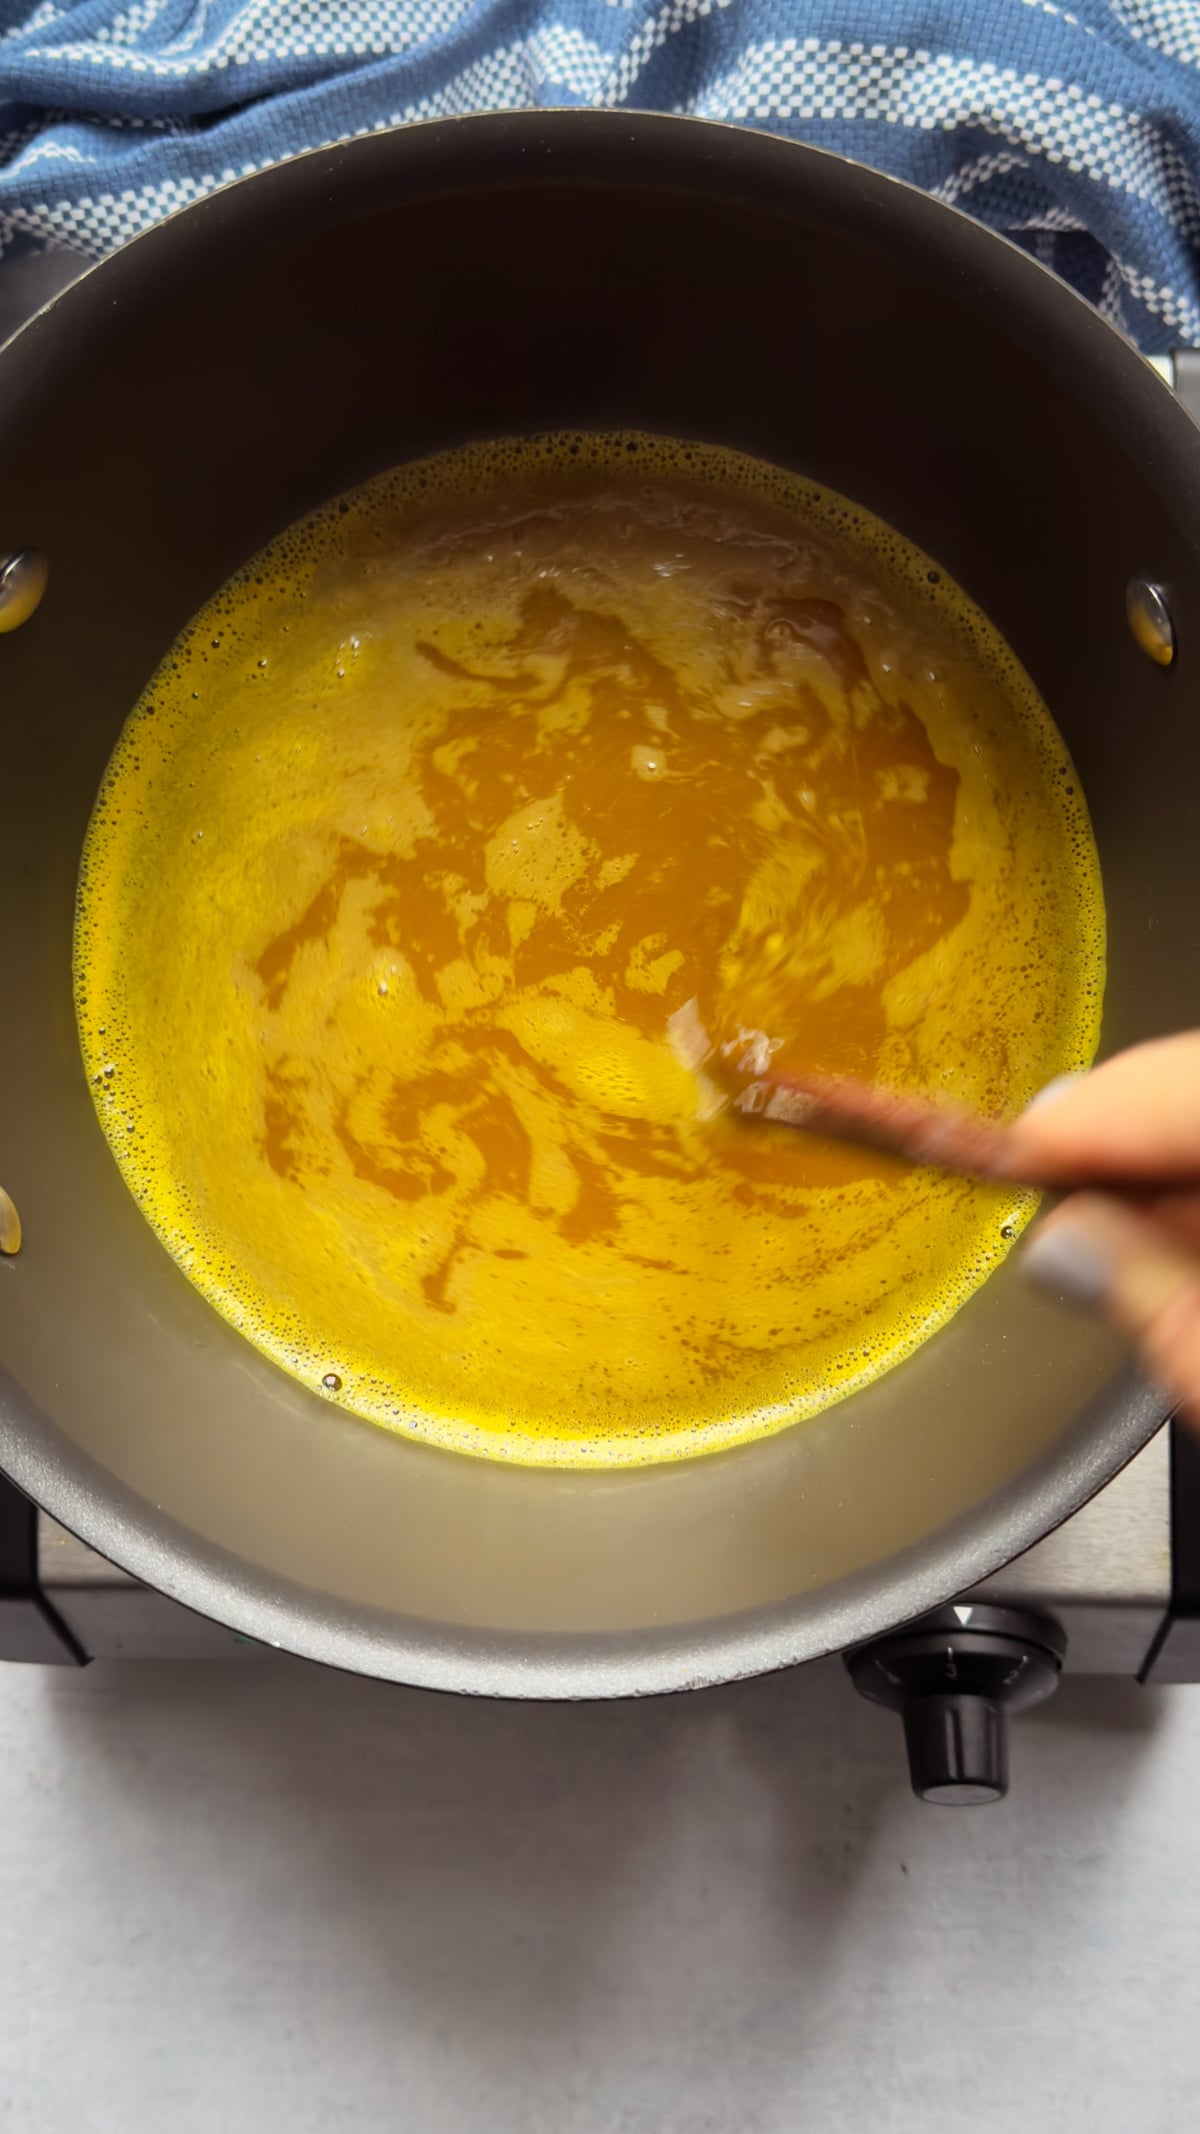 Broth for Chinese egg drop soup being stirred in a pot on top of a gray surface with a blue napkin on the side.